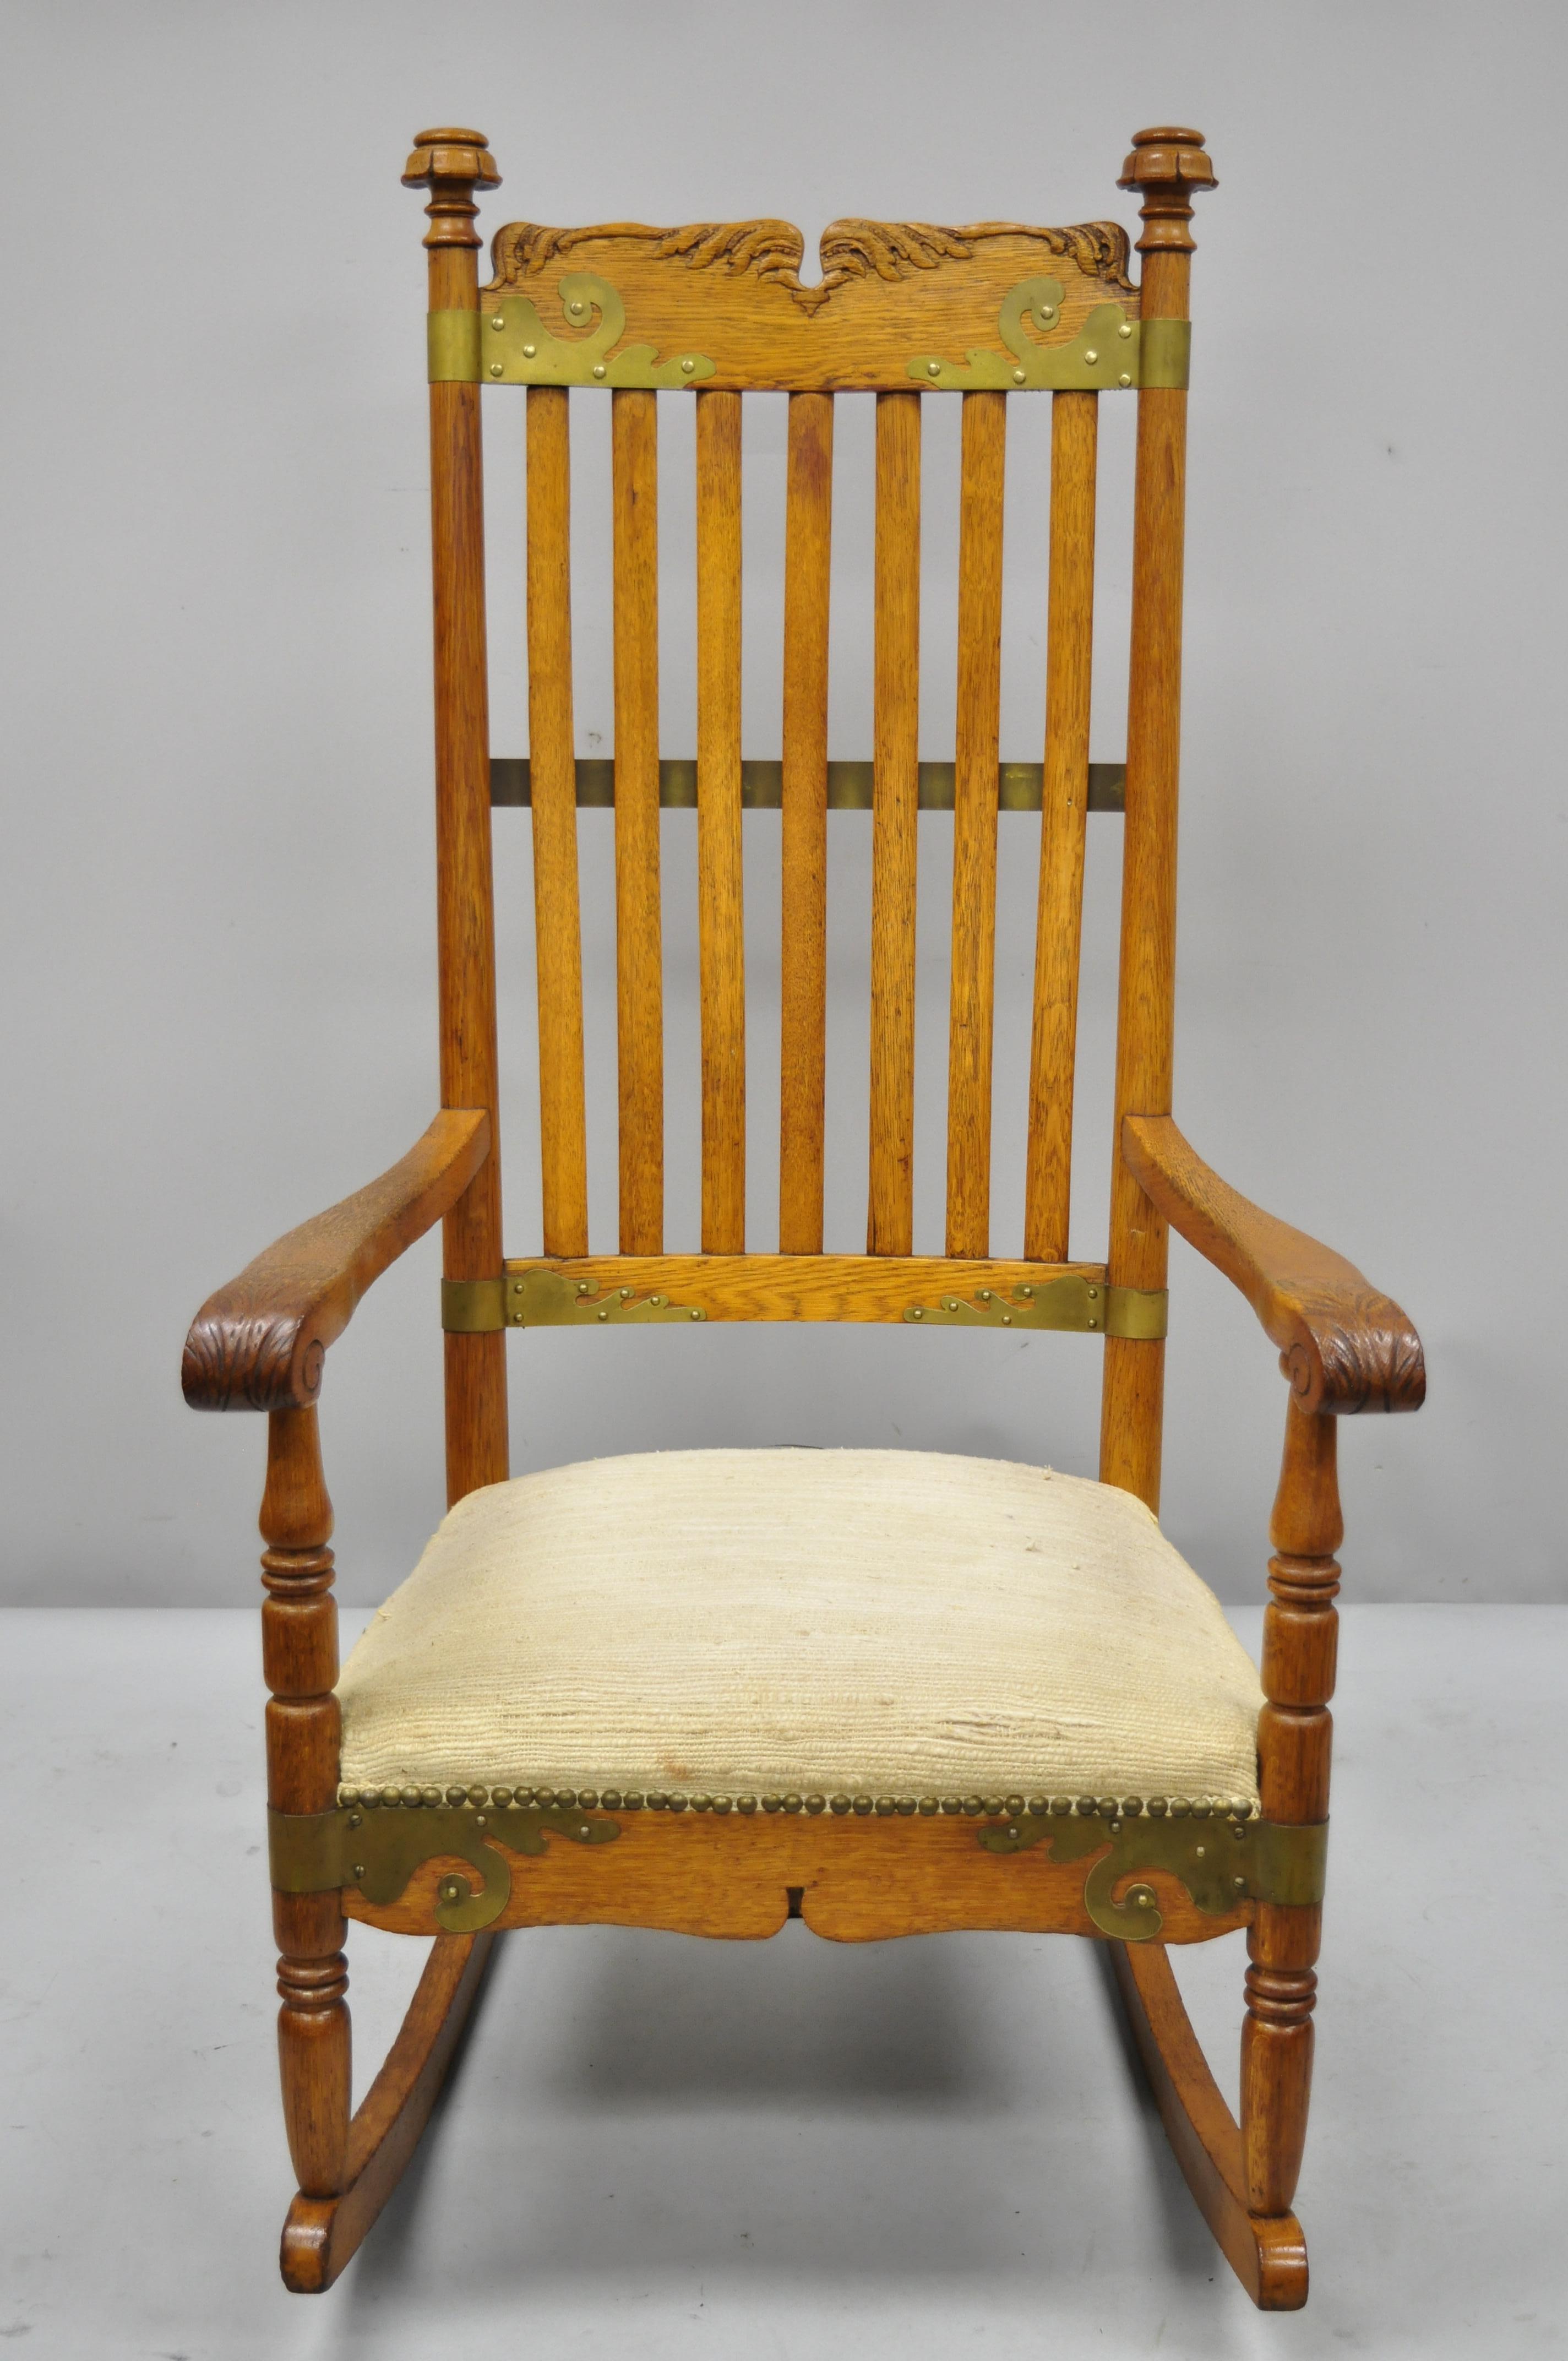 Antique Victorian oakwood Arts & Crafts rocker rocking chair with brass accents. Item features ornate brass accents, brass rear brace to back, solid wood construction, beautiful wood grain, upholstered seat, nicely carved details, very nice antique